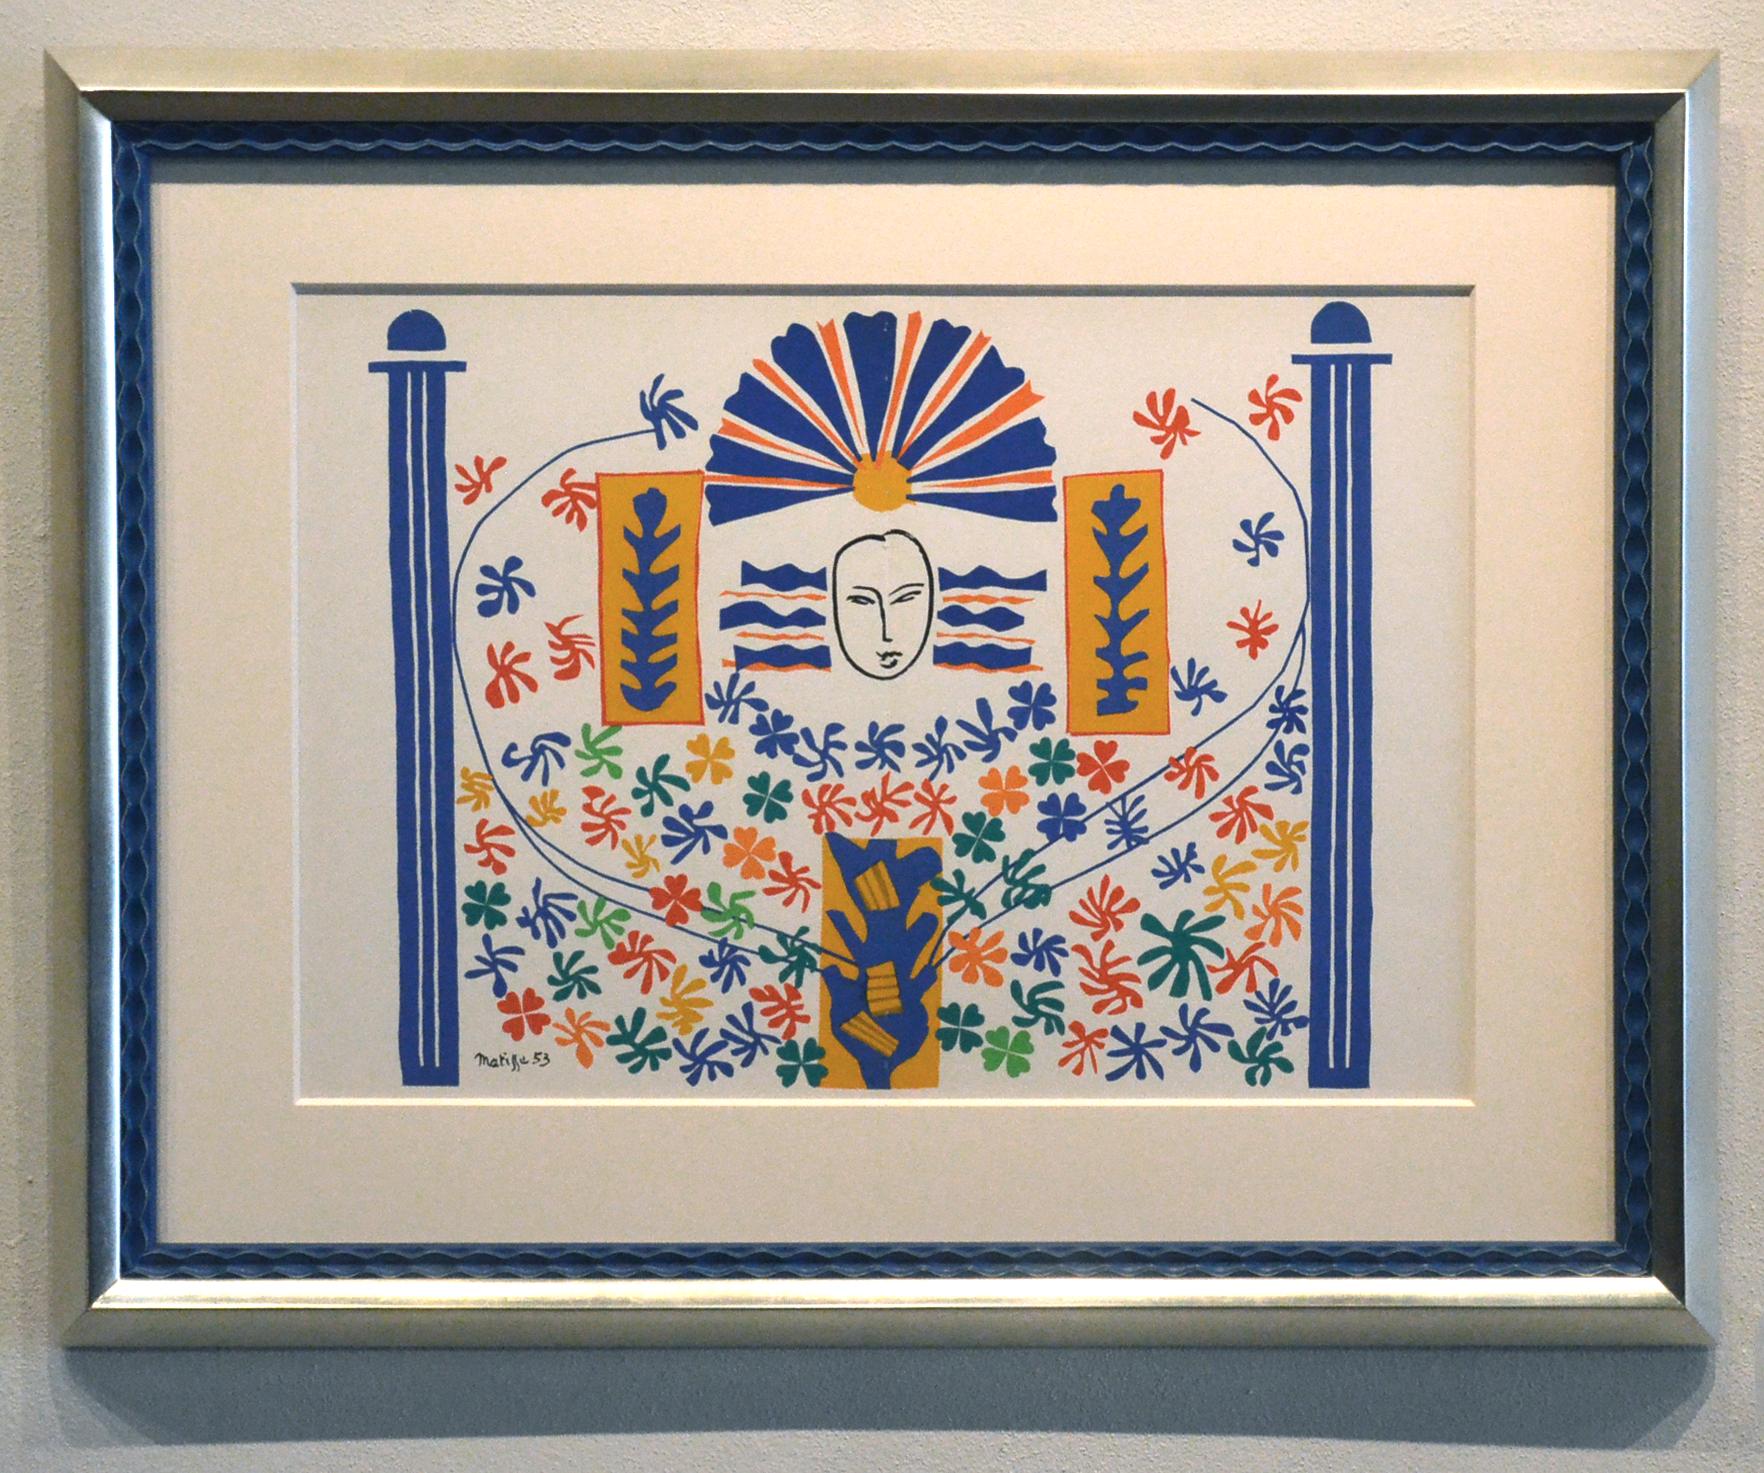 Apollon, Expressionist, colorful, framed lithograph - Print by Henri Matisse